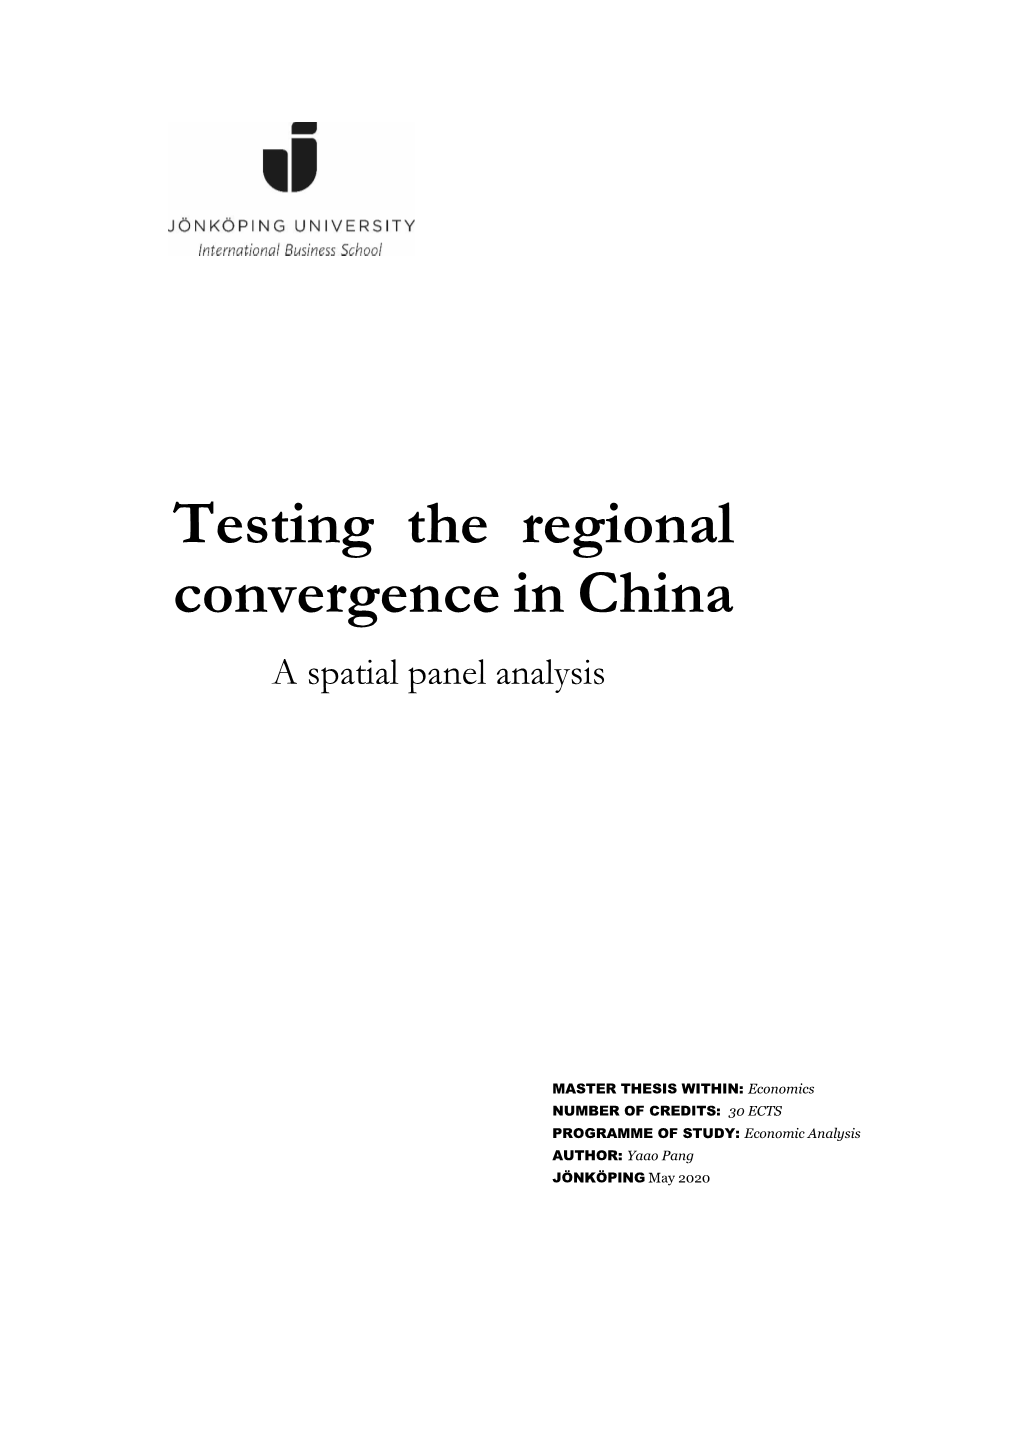 Testing the Regional Convergence in China a Spatial Panel Analysis